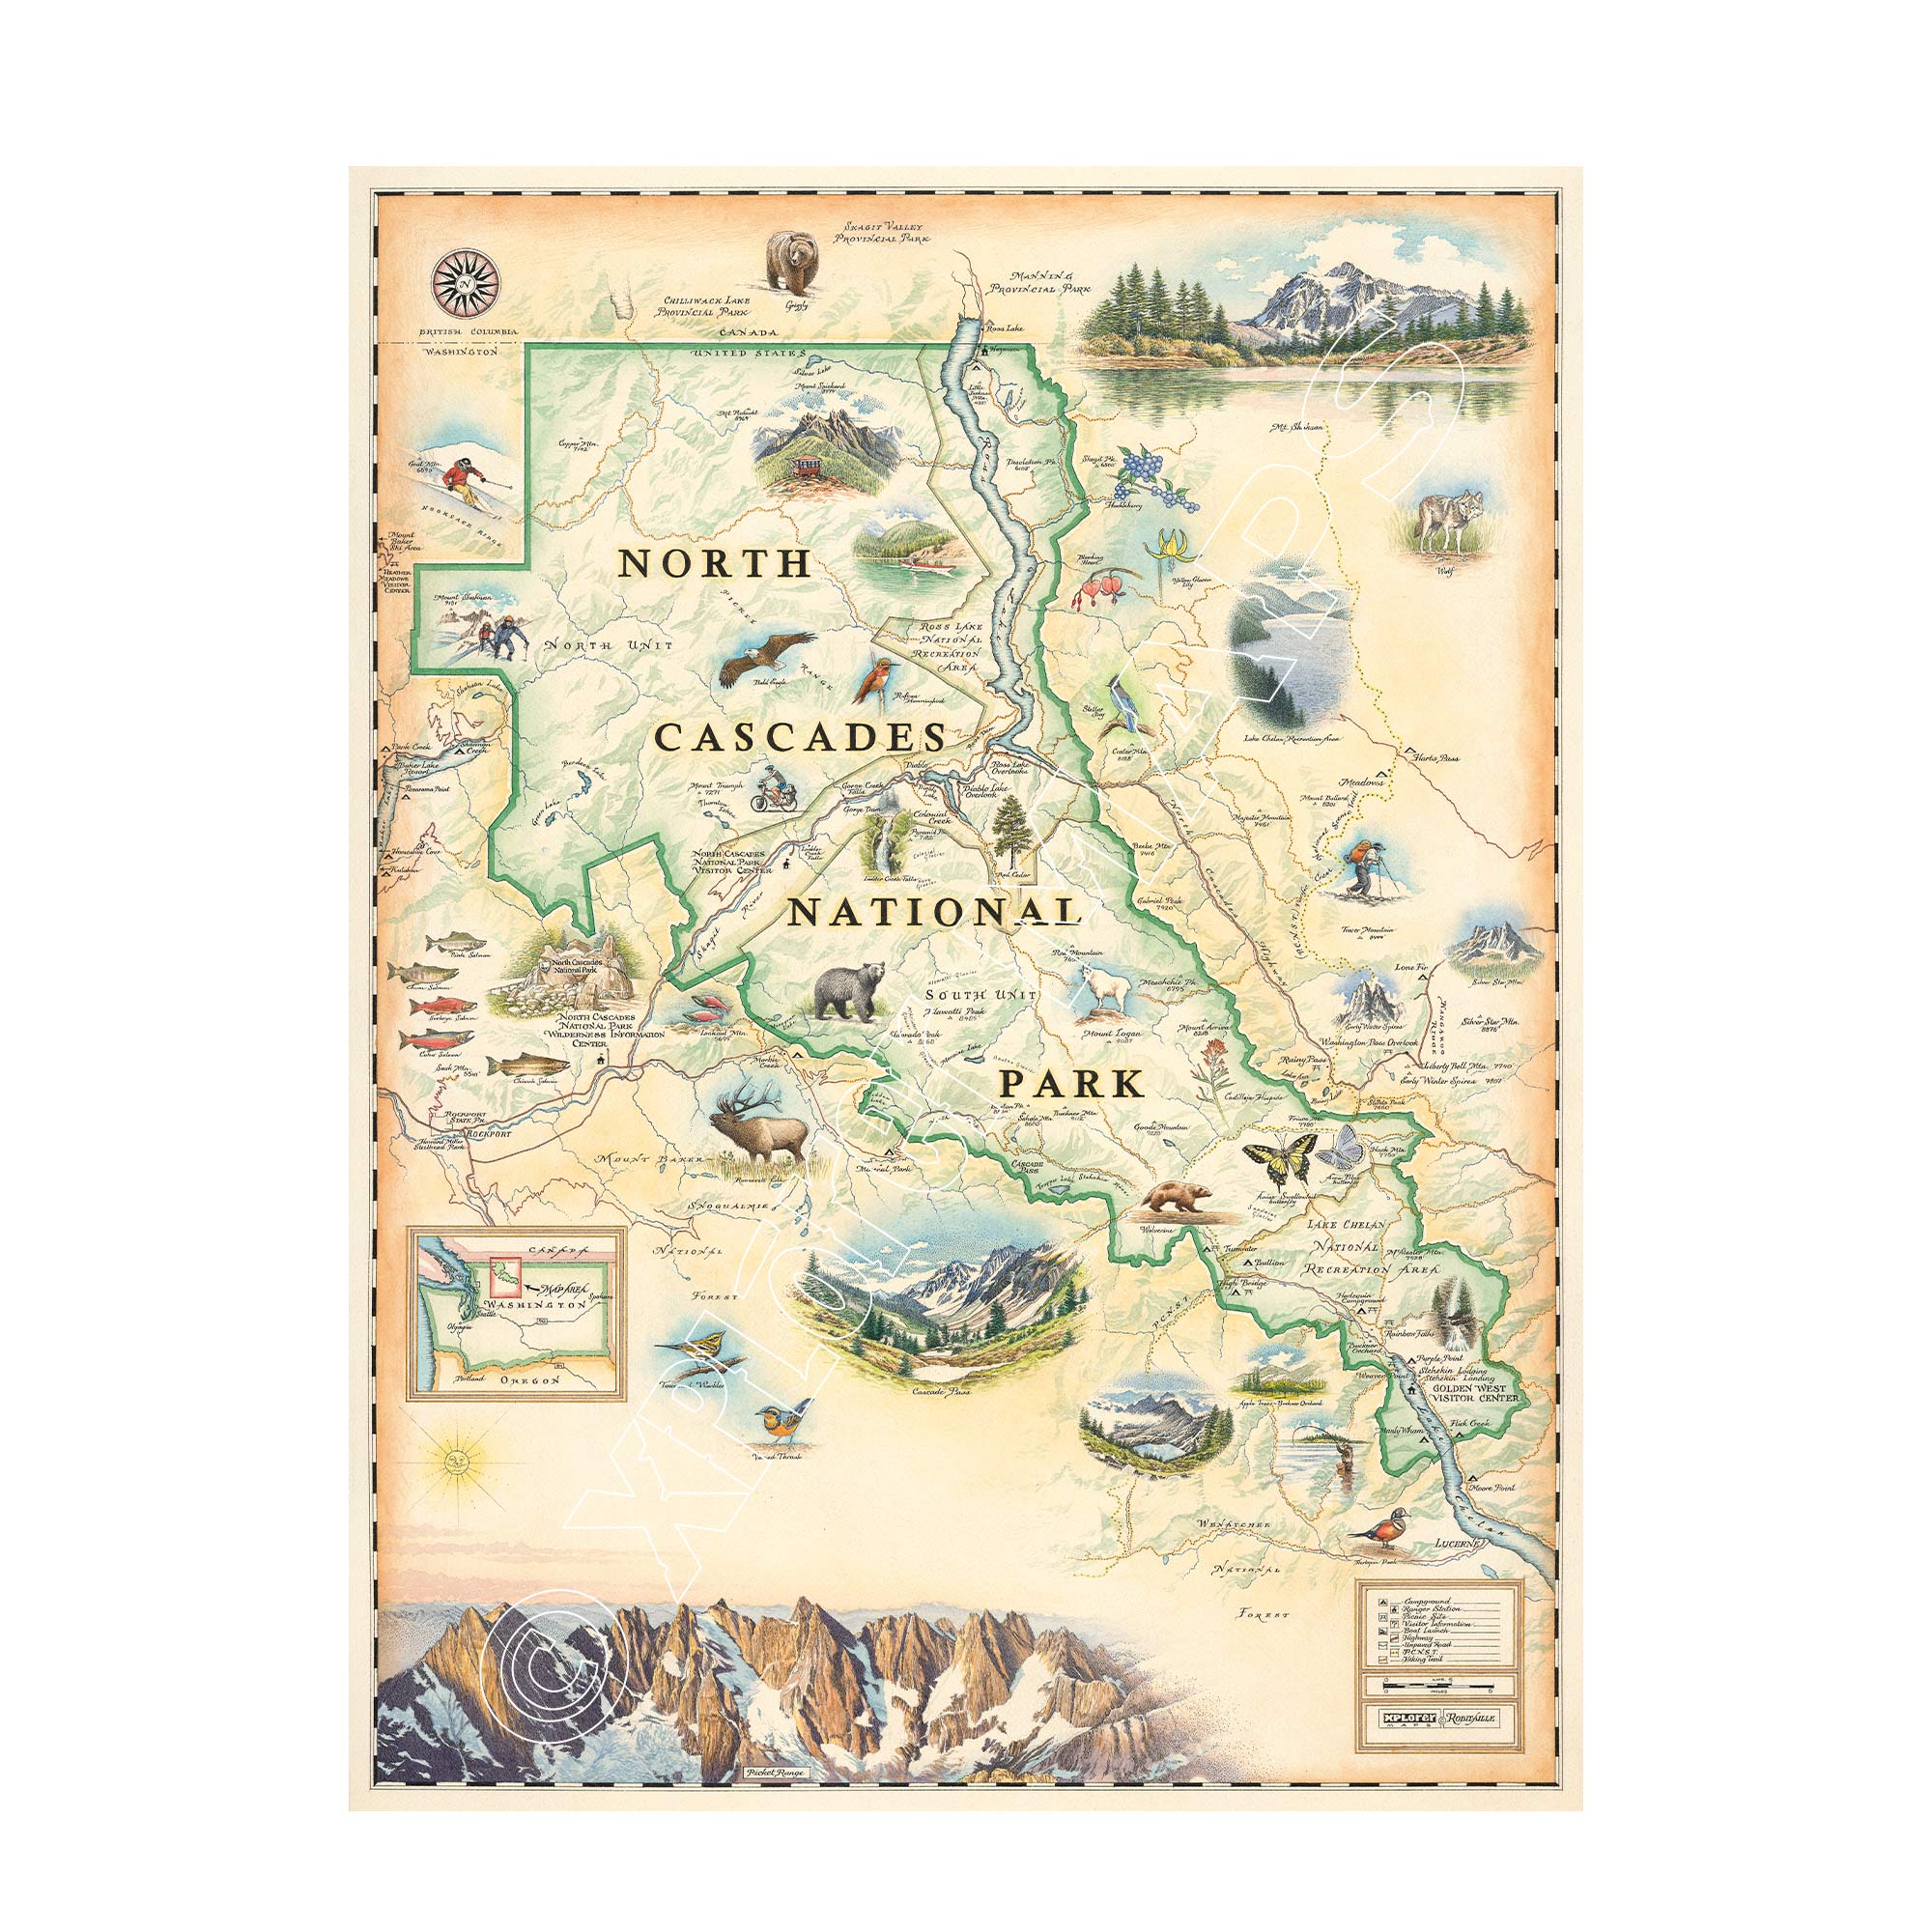 North Cascades National Park hand-drawn map in earth tones beige and green. The map features illustrations of flora and fauna such as black bear, elk, wolverine, glacier lily, and huckleberries. Other illustrations include, Pickett Range, Cascade Pass, and Lake Chelan Recreation area. Measures 18x24.